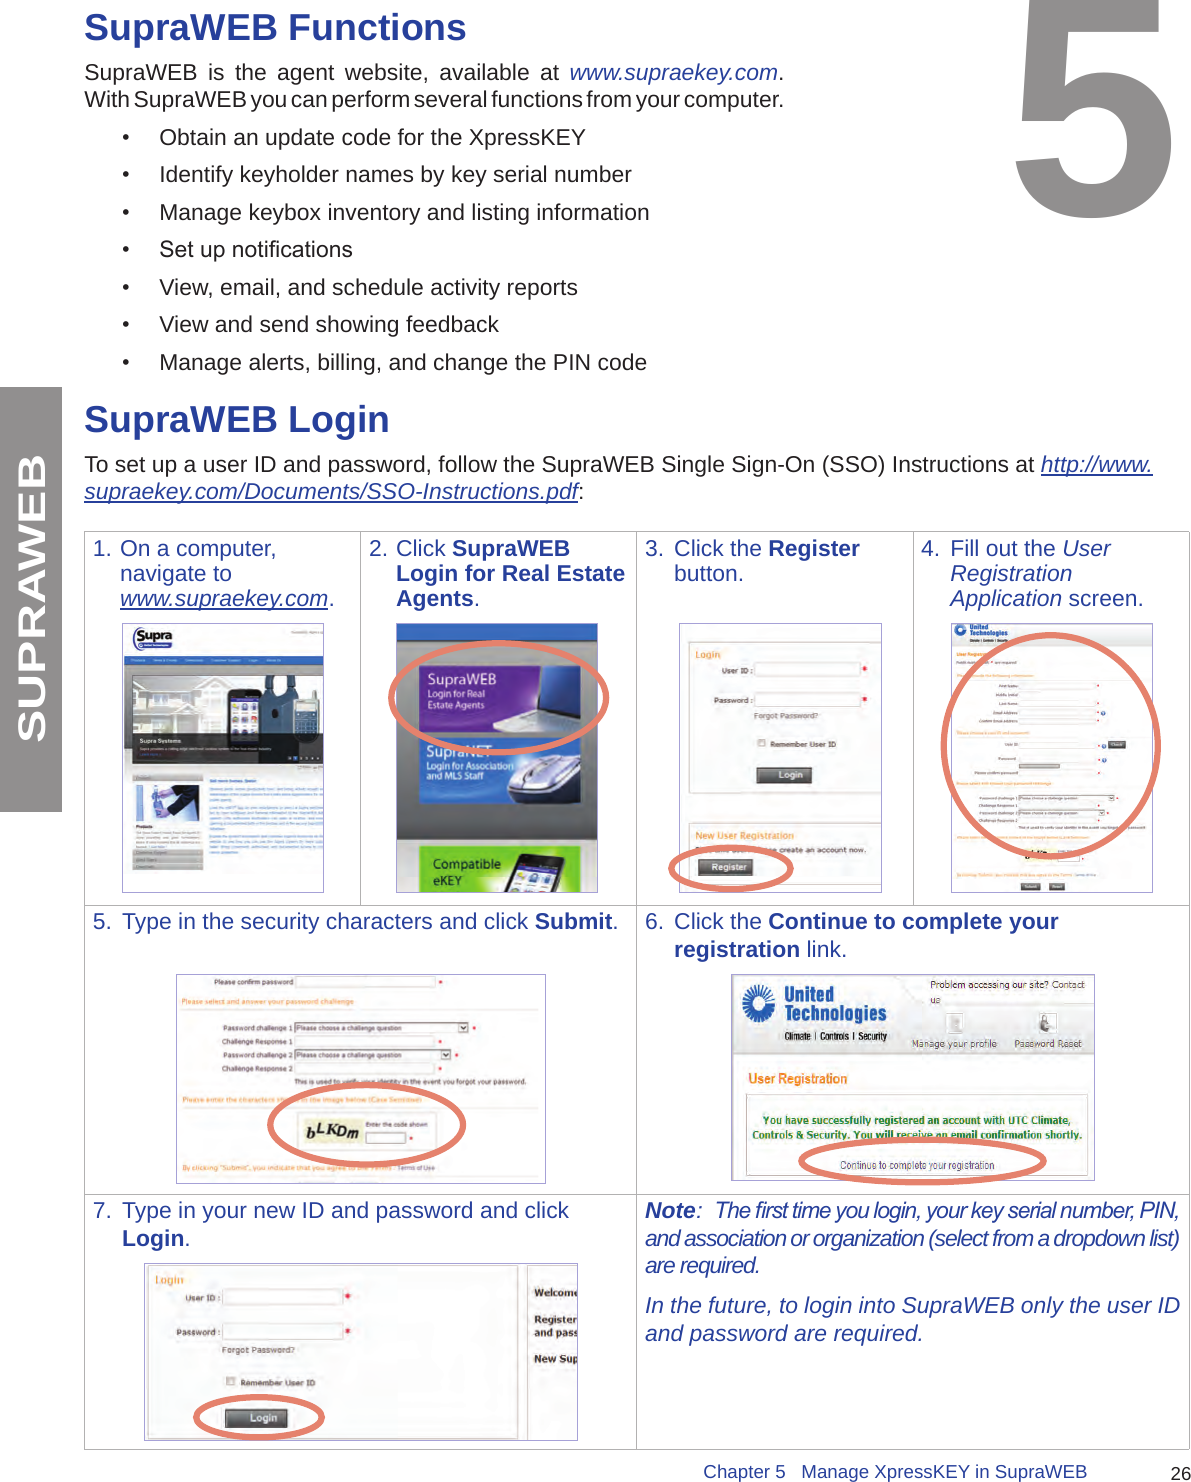 26Chapter 5   Manage XpressKEY in SupraWEBSUPRAWEBSupraWEB FunctionsSupraWEB is the agent website, available at www.supraekey.com.  With SupraWEB you can perform several functions from your computer.  •  Obtain an update code for the XpressKEY•  Identify keyholder names by key serial number•  Manage keybox inventory and listing information•  Set up notications •  View, email, and schedule activity reports•  View and send showing feedback•  Manage alerts, billing, and change the PIN code5SupraWEB LoginTo set up a user ID and password, follow the SupraWEB Single Sign-On (SSO) Instructions at http://www.supraekey.com/Documents/SSO-Instructions.pdf:1. On a computer, navigate to www.supraekey.com.2. Click SupraWEB Login for Real Estate Agents.3.  Click the Register button. 4.  Fill out the User Registration Application screen.5.  Type in the security characters and click Submit. 6.  Click the Continue to complete your registration link.7.  Type in your new ID and password and click Login.Note:  The rst time you login, your key serial number, PIN, and association or organization (select from a dropdown list) are required.In the future, to login into SupraWEB only the user ID and password are required.